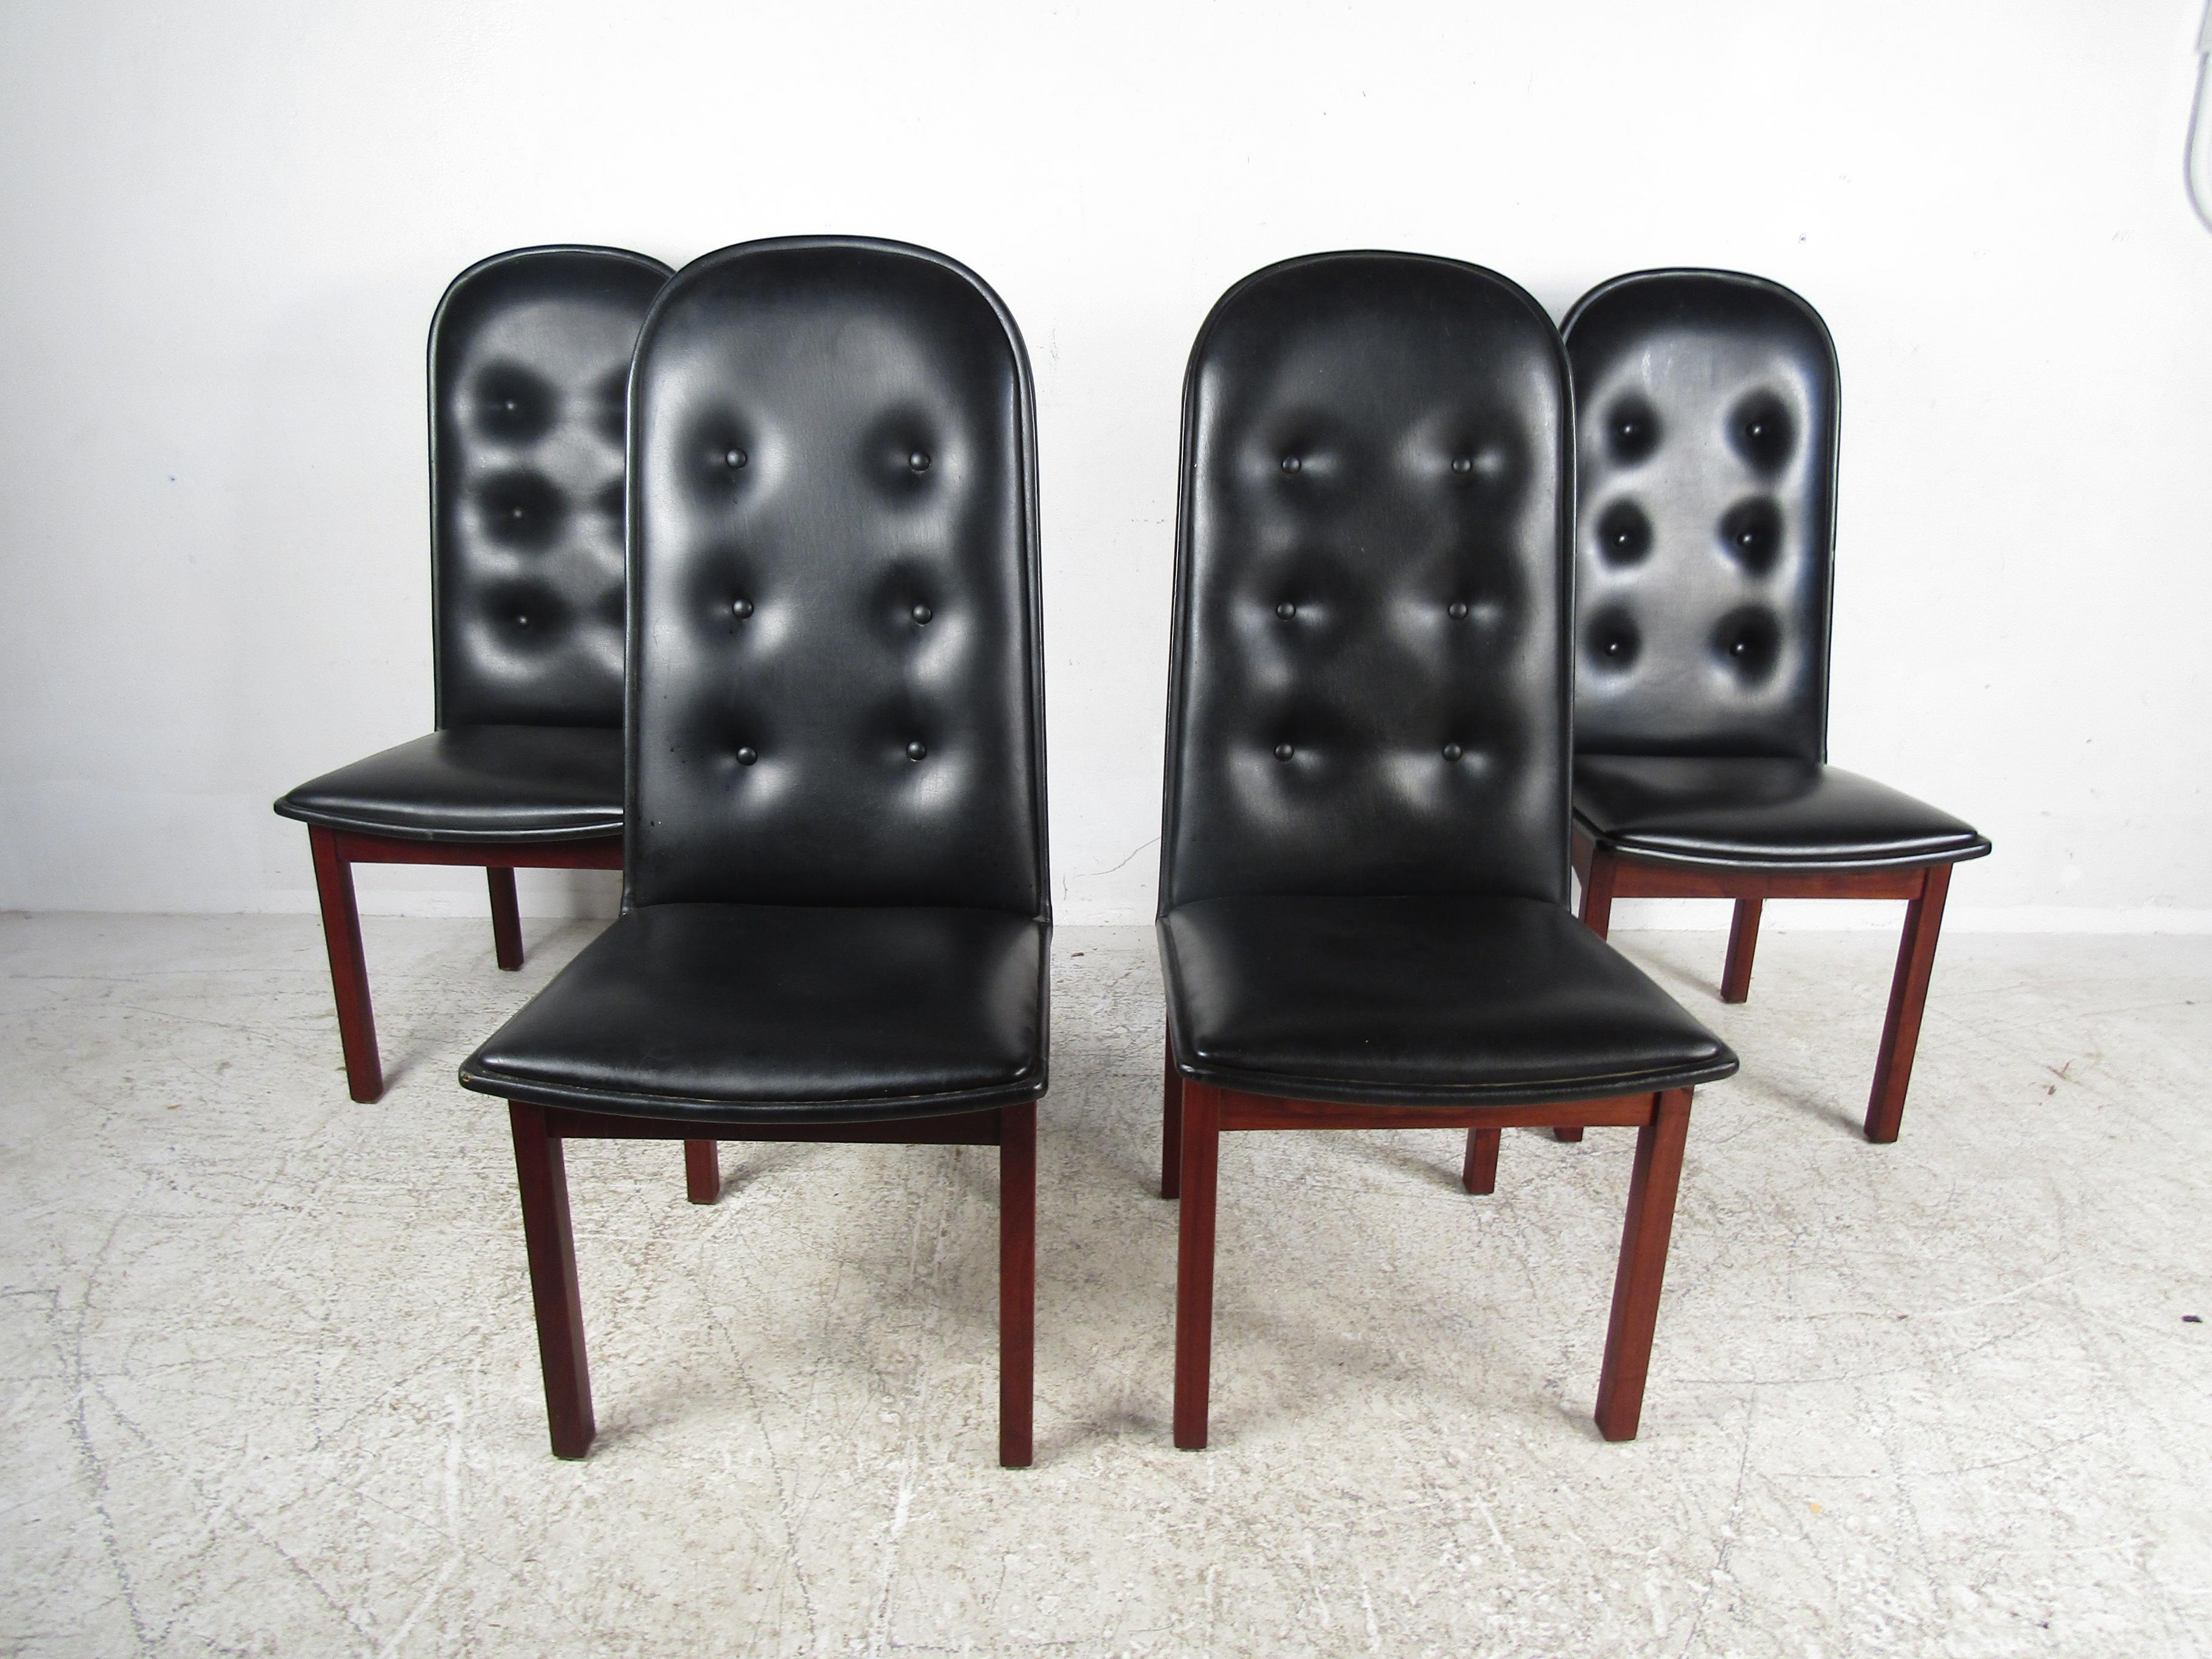 Nice Mid-Century Modern dining set. Danish modern dining chairs made by Domino Mobler, with rosewood frames and tufted black vinyl upholstery. Spacious table with two leaves; each leaf adds an additional 20 inches to the table's width. Please